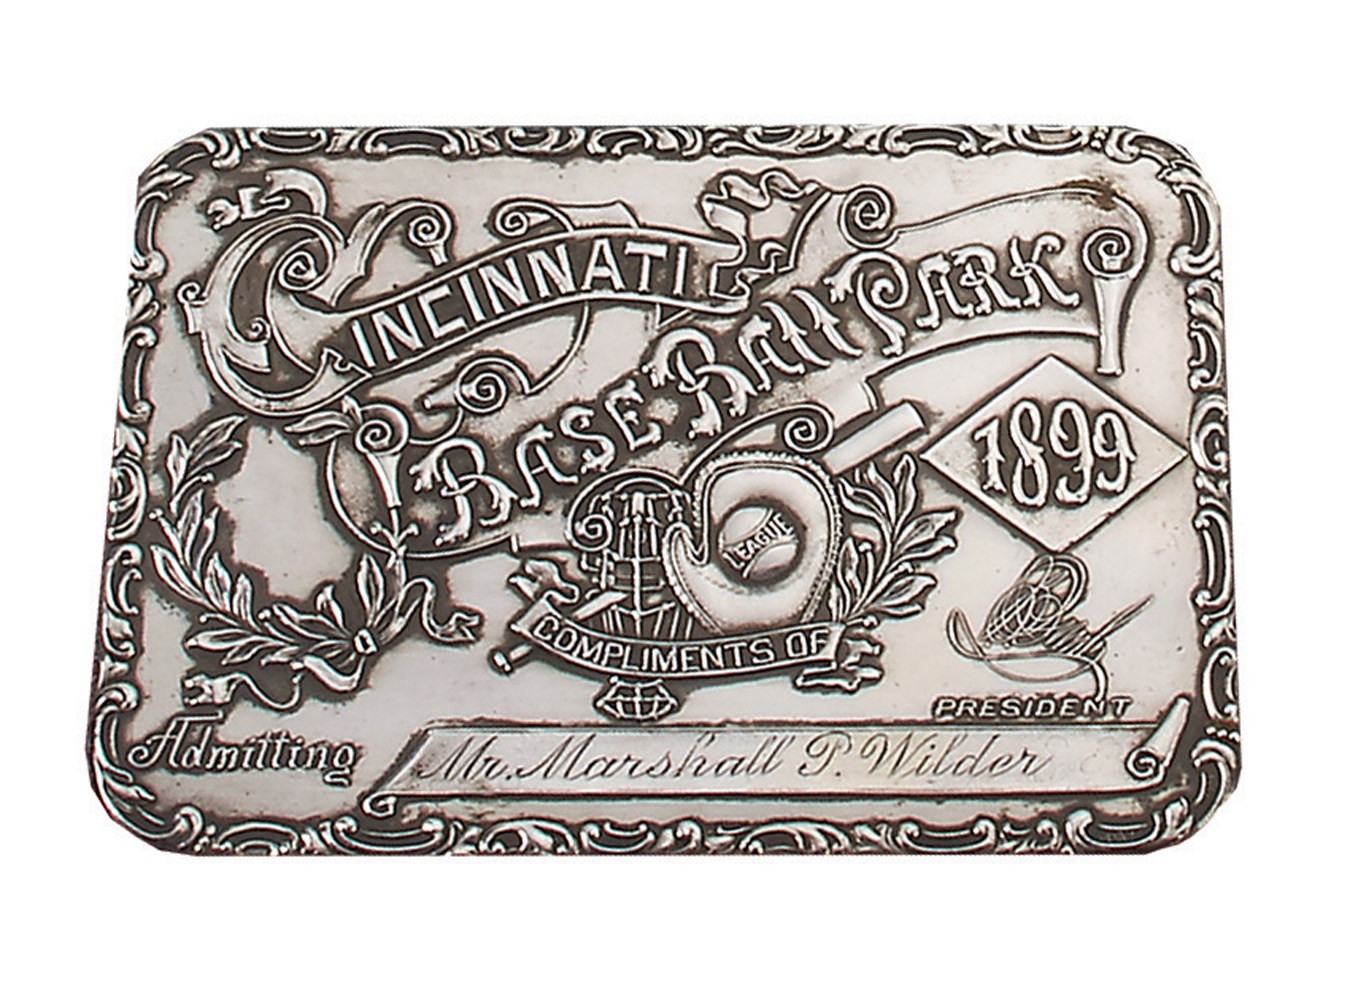 Early Baseball - 1899 Cincinnati Reds League Park Sterling Silver Season Pass – Presented to Groundbreaking Disabled Entertainer